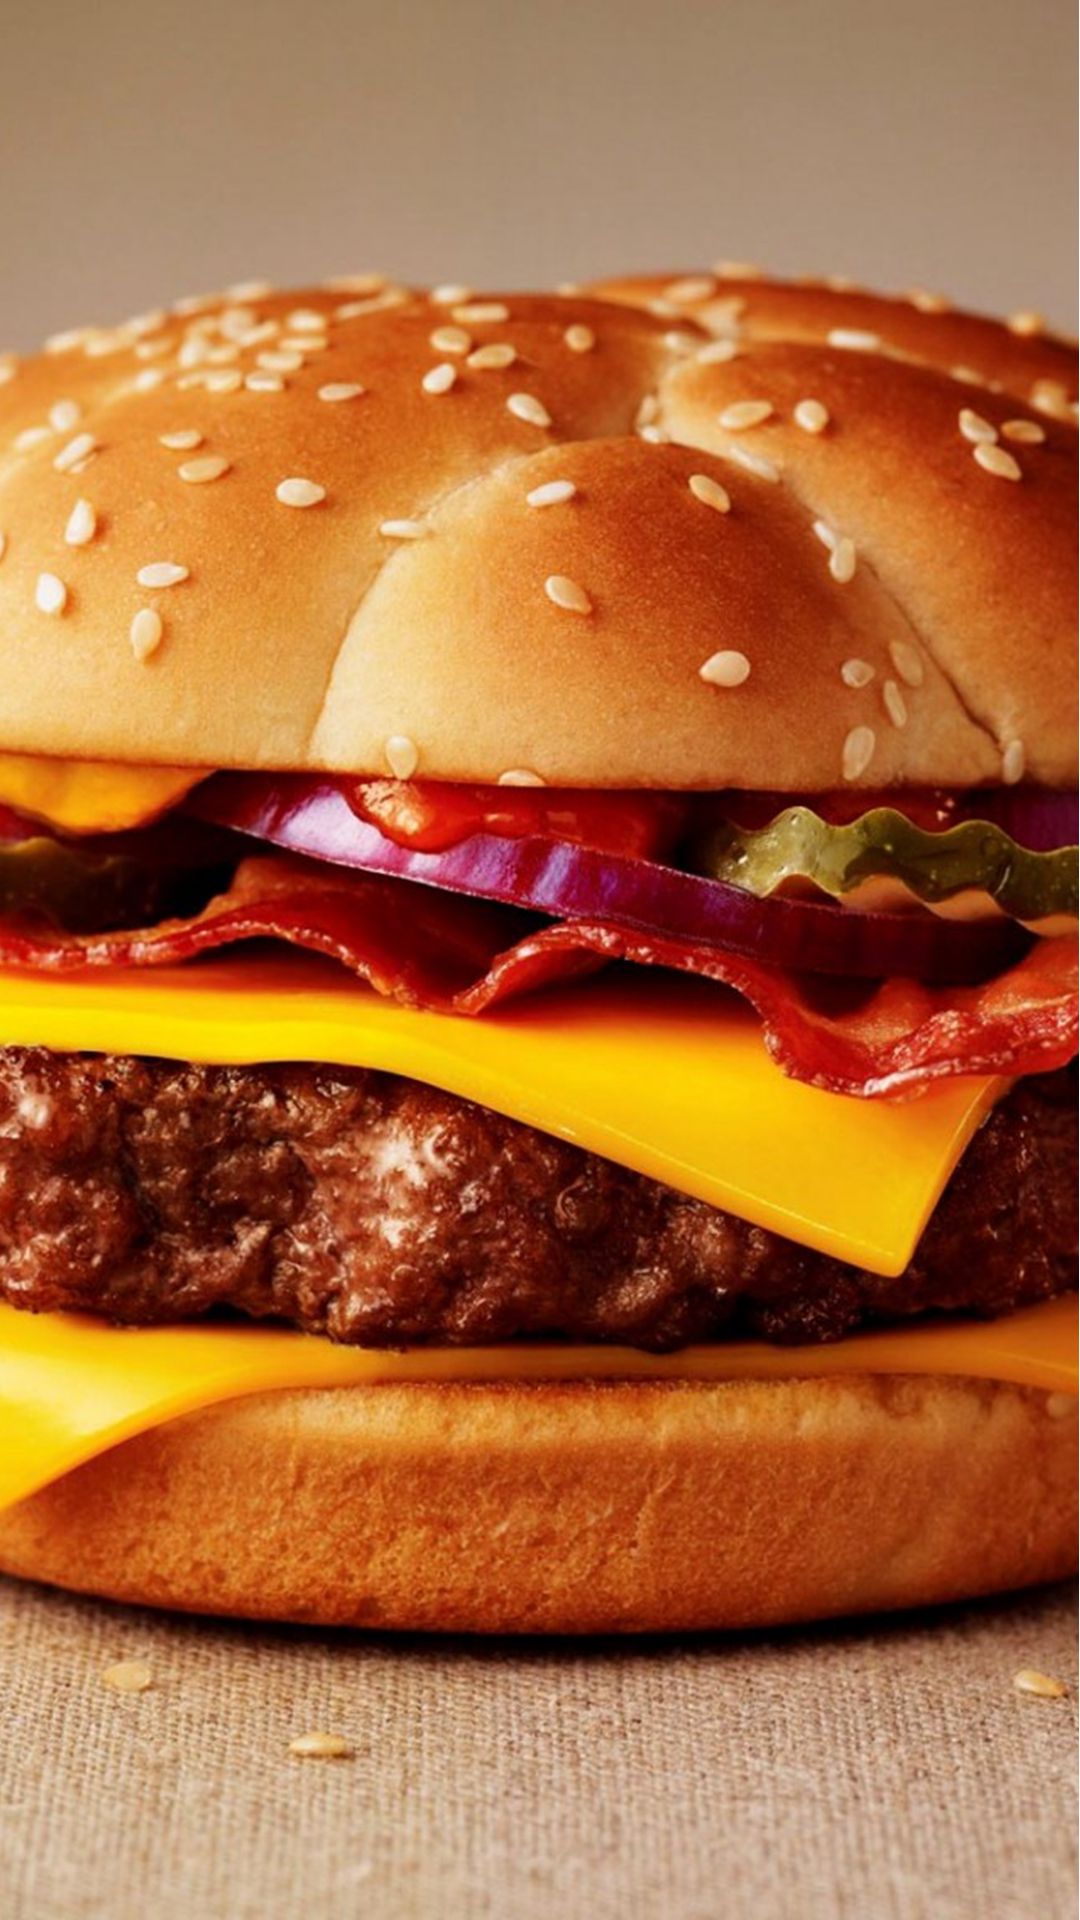 Cute Smelly Fast Food Cheeseburger iPhone Wallpaper